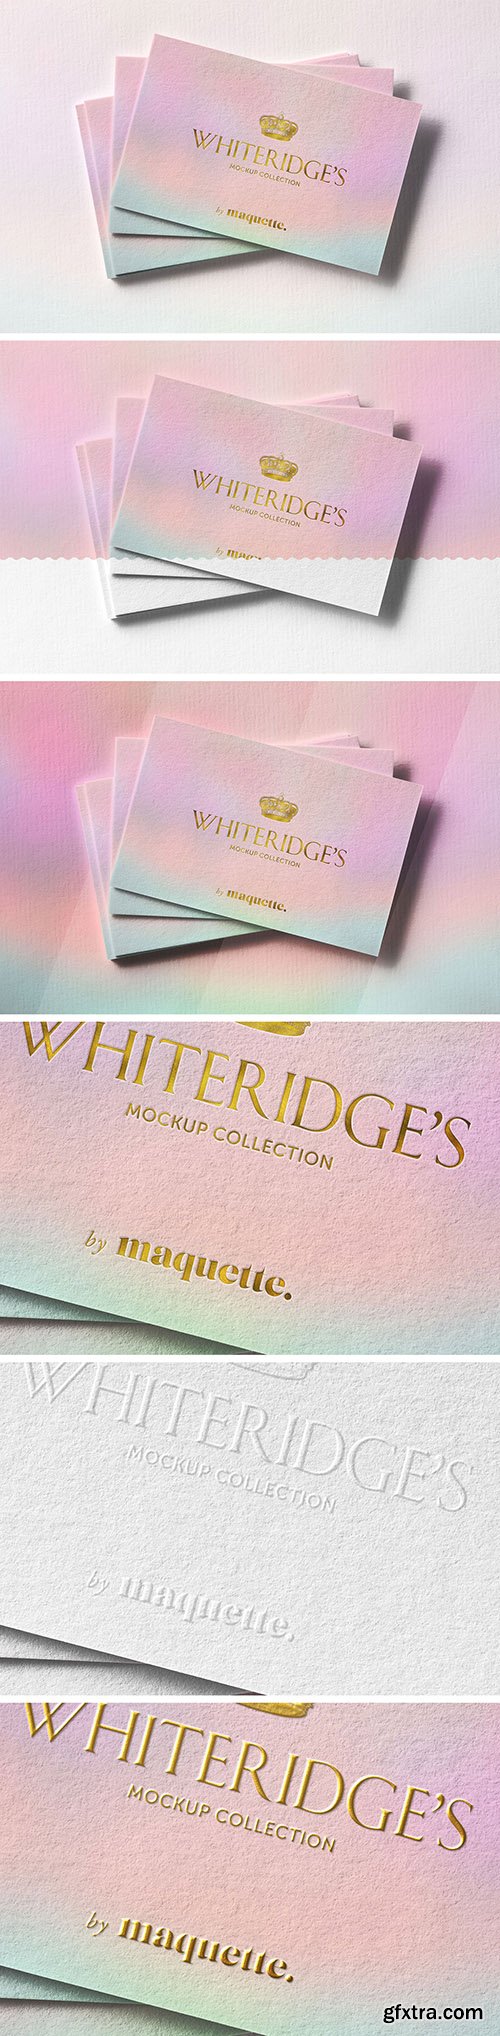 Stack of Luxury Business Cards with Gold Embossing Mockup 2 130414397